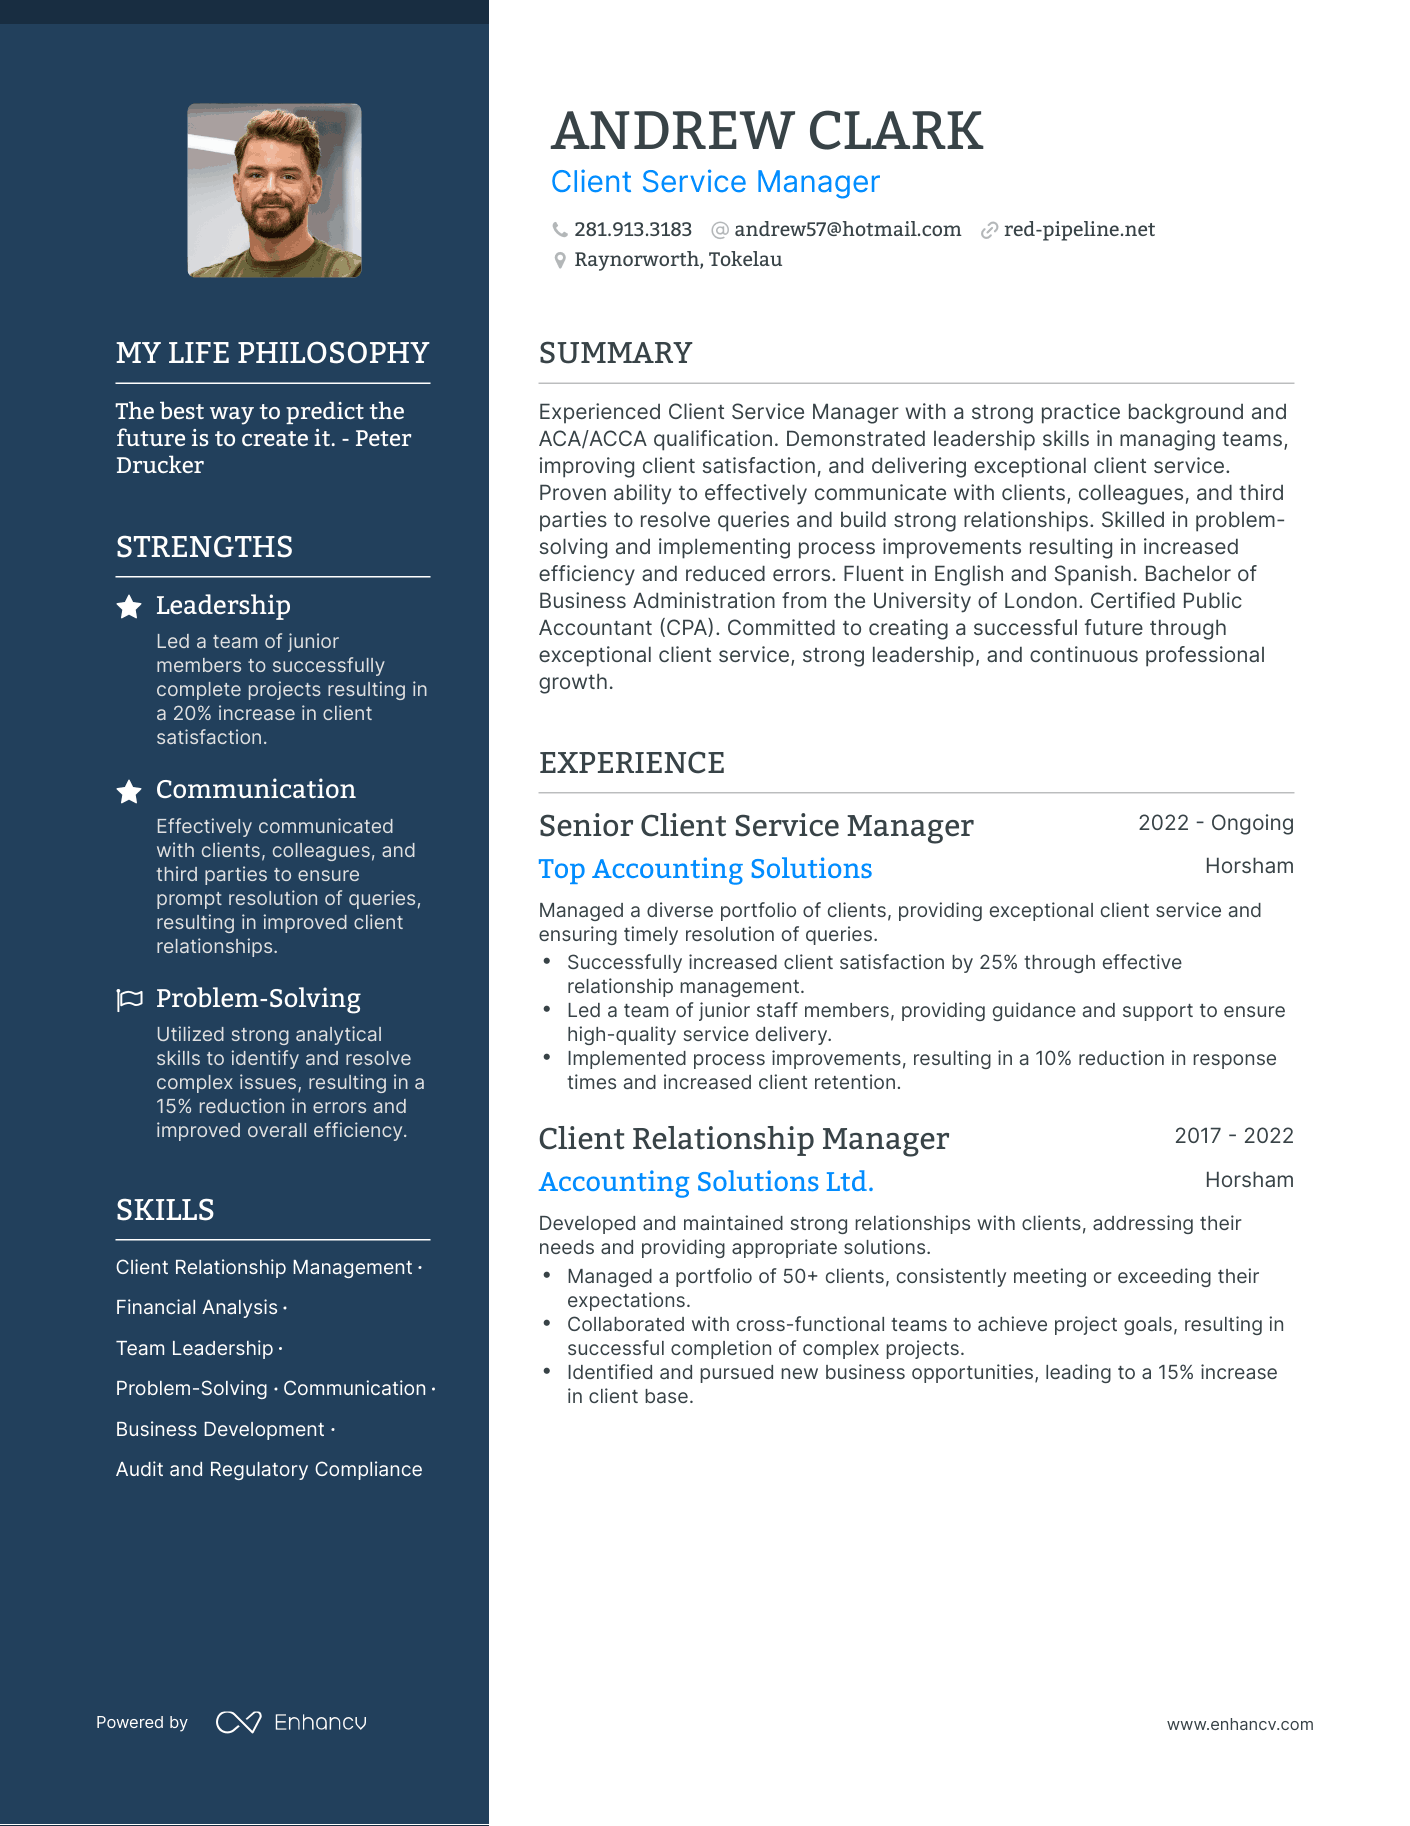 Client Service Manager resume example